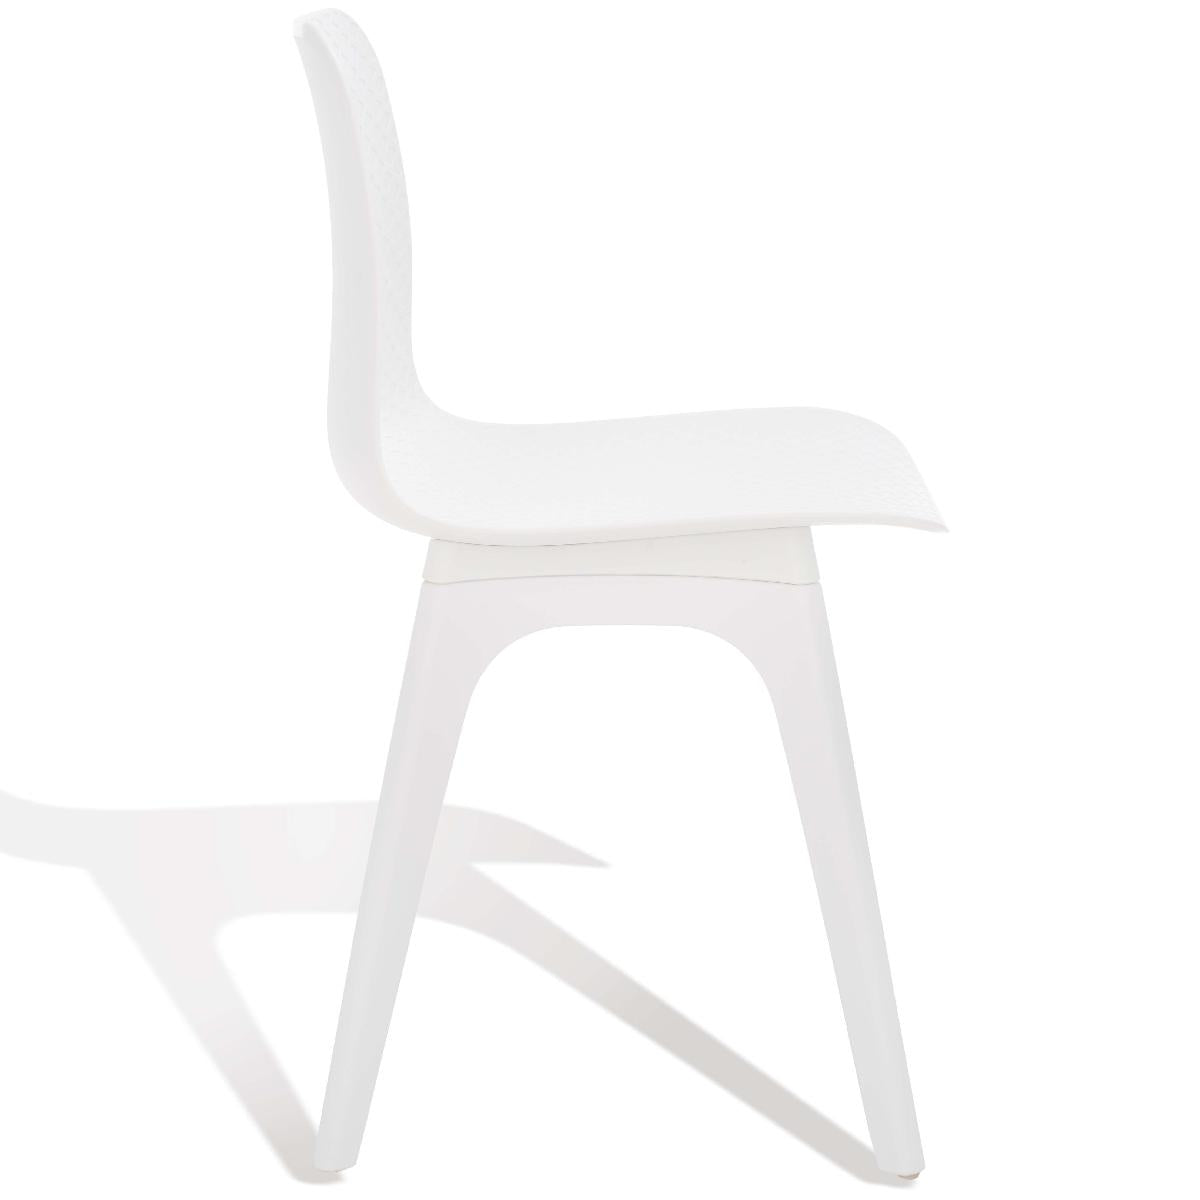 Safavieh Couture Damiano Molded Plastic Dining Chair - White